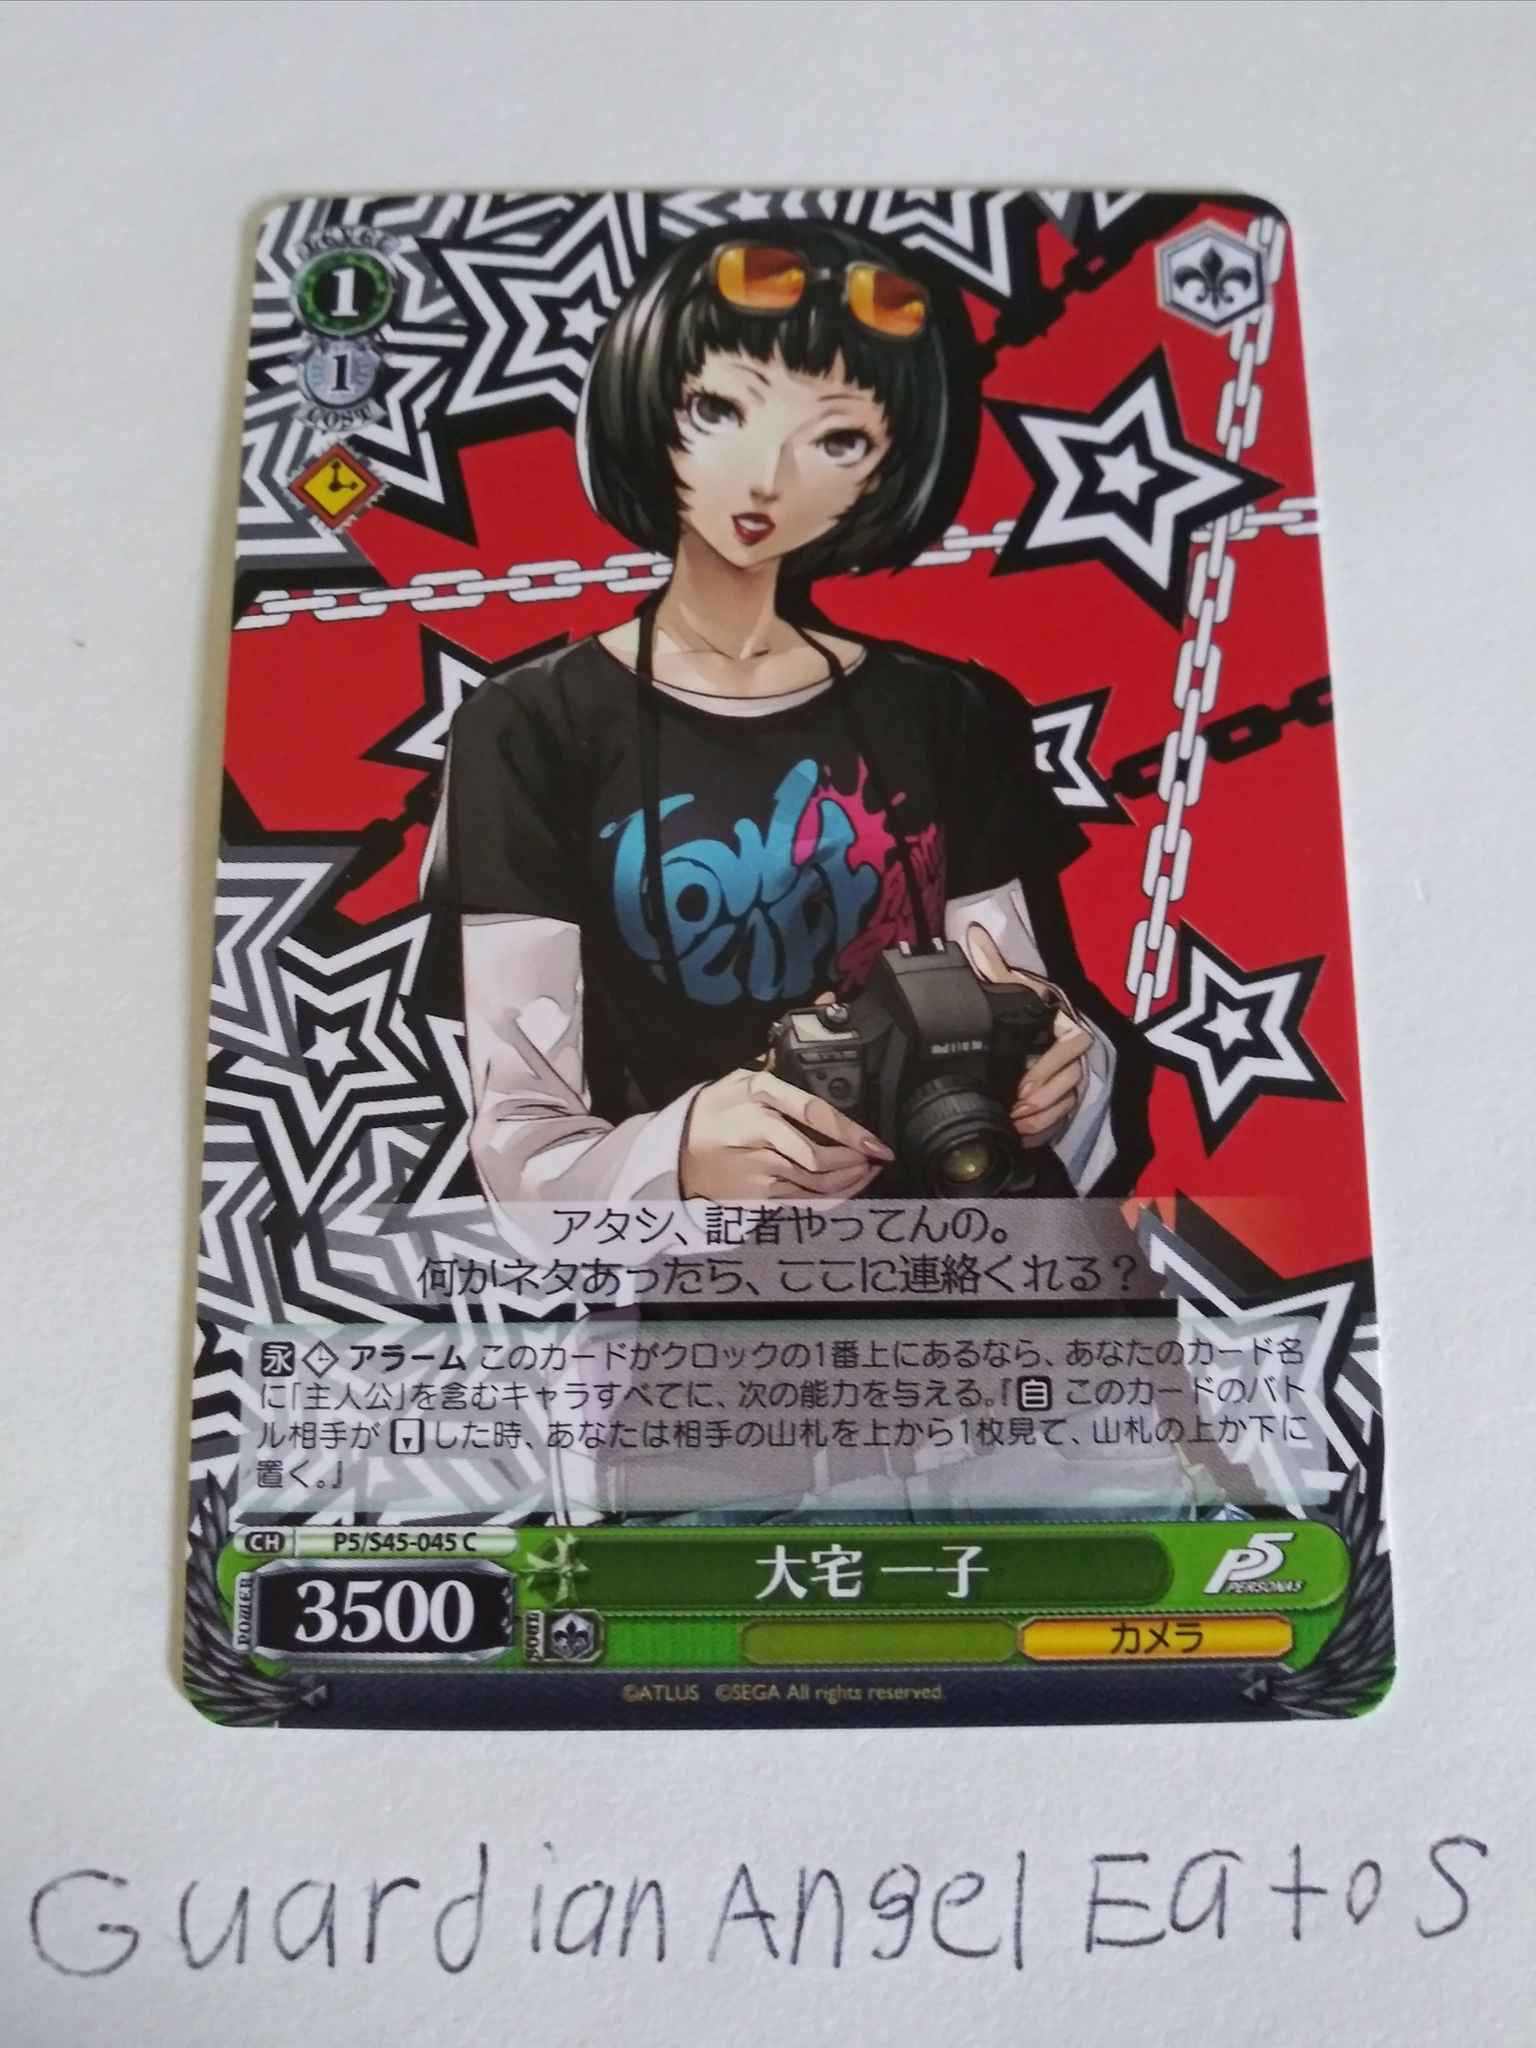 Pack Fresh Japanese Language Ichiko Ohya Persona 5 Weiss Schwarz Online Gaming Store For Cards Miniatures Singles Packs Booster Boxes